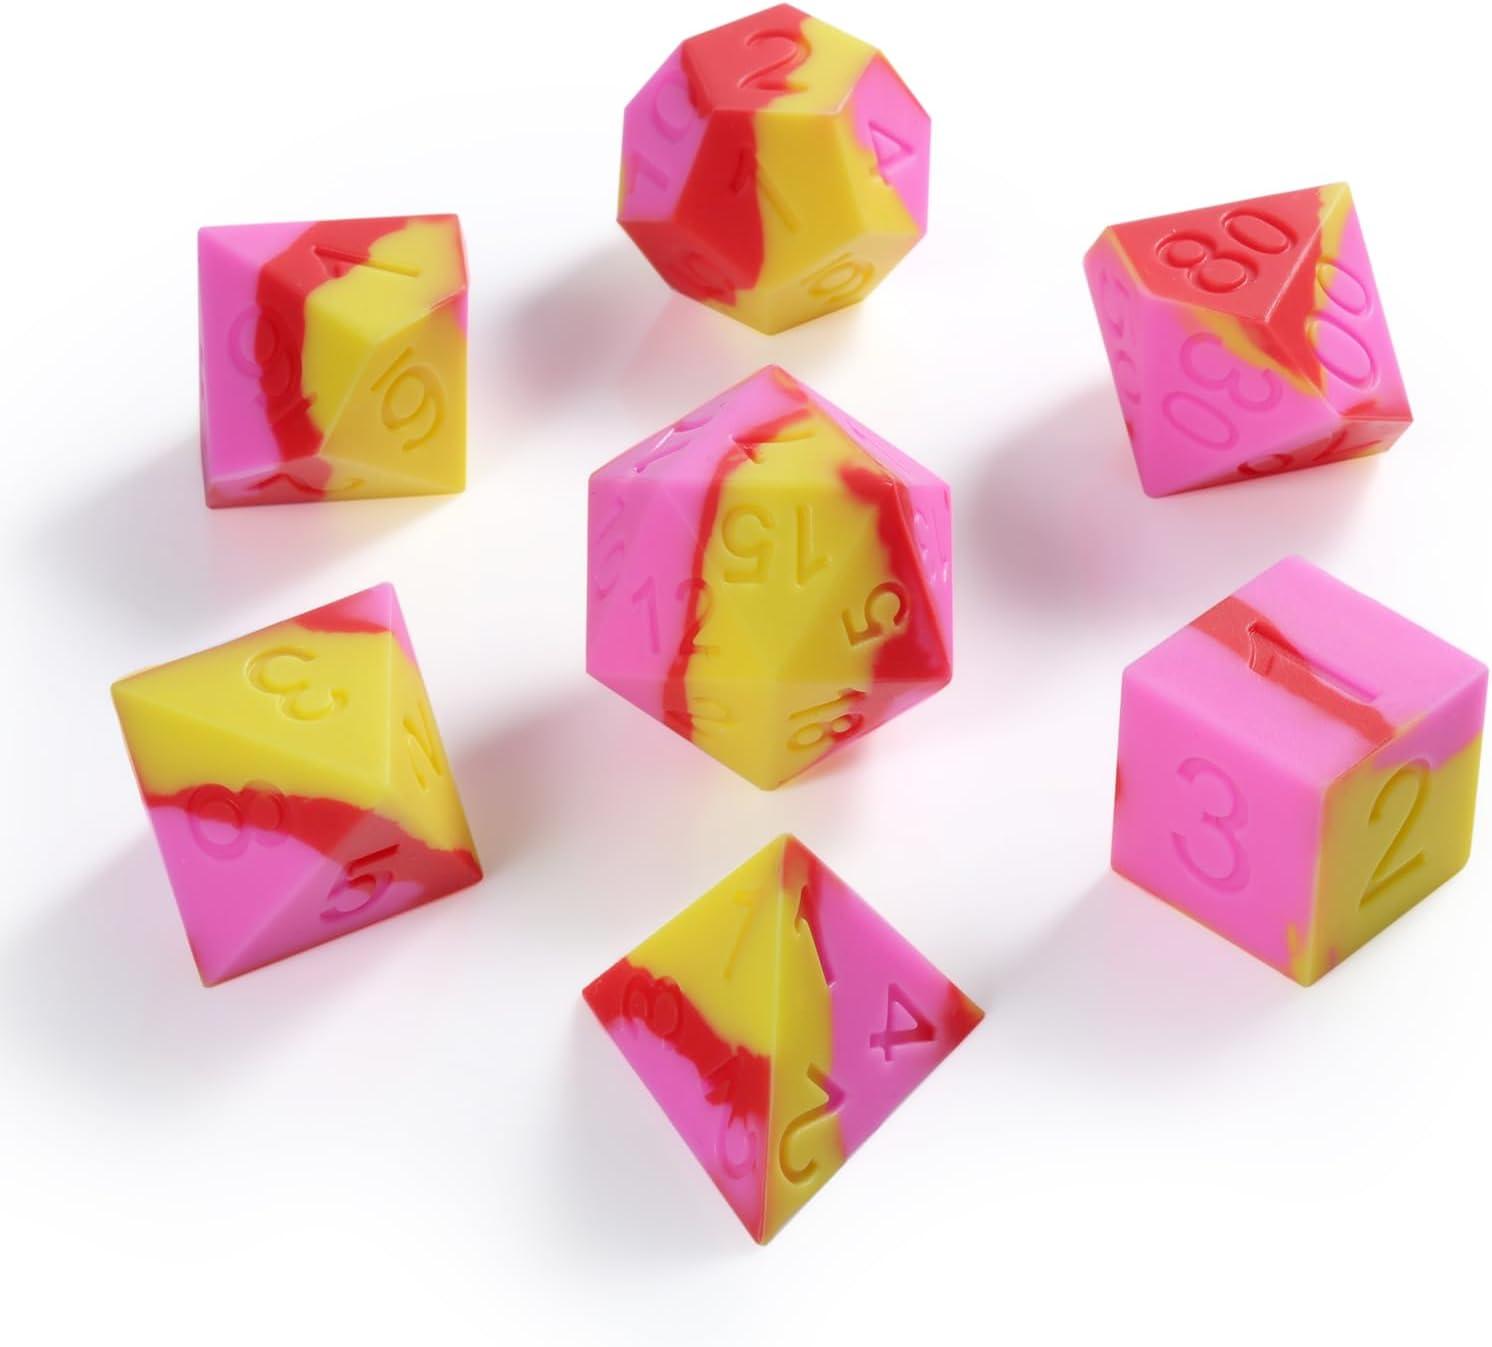 Sunset Fusion Silicone Dice Set - Living Skies Games